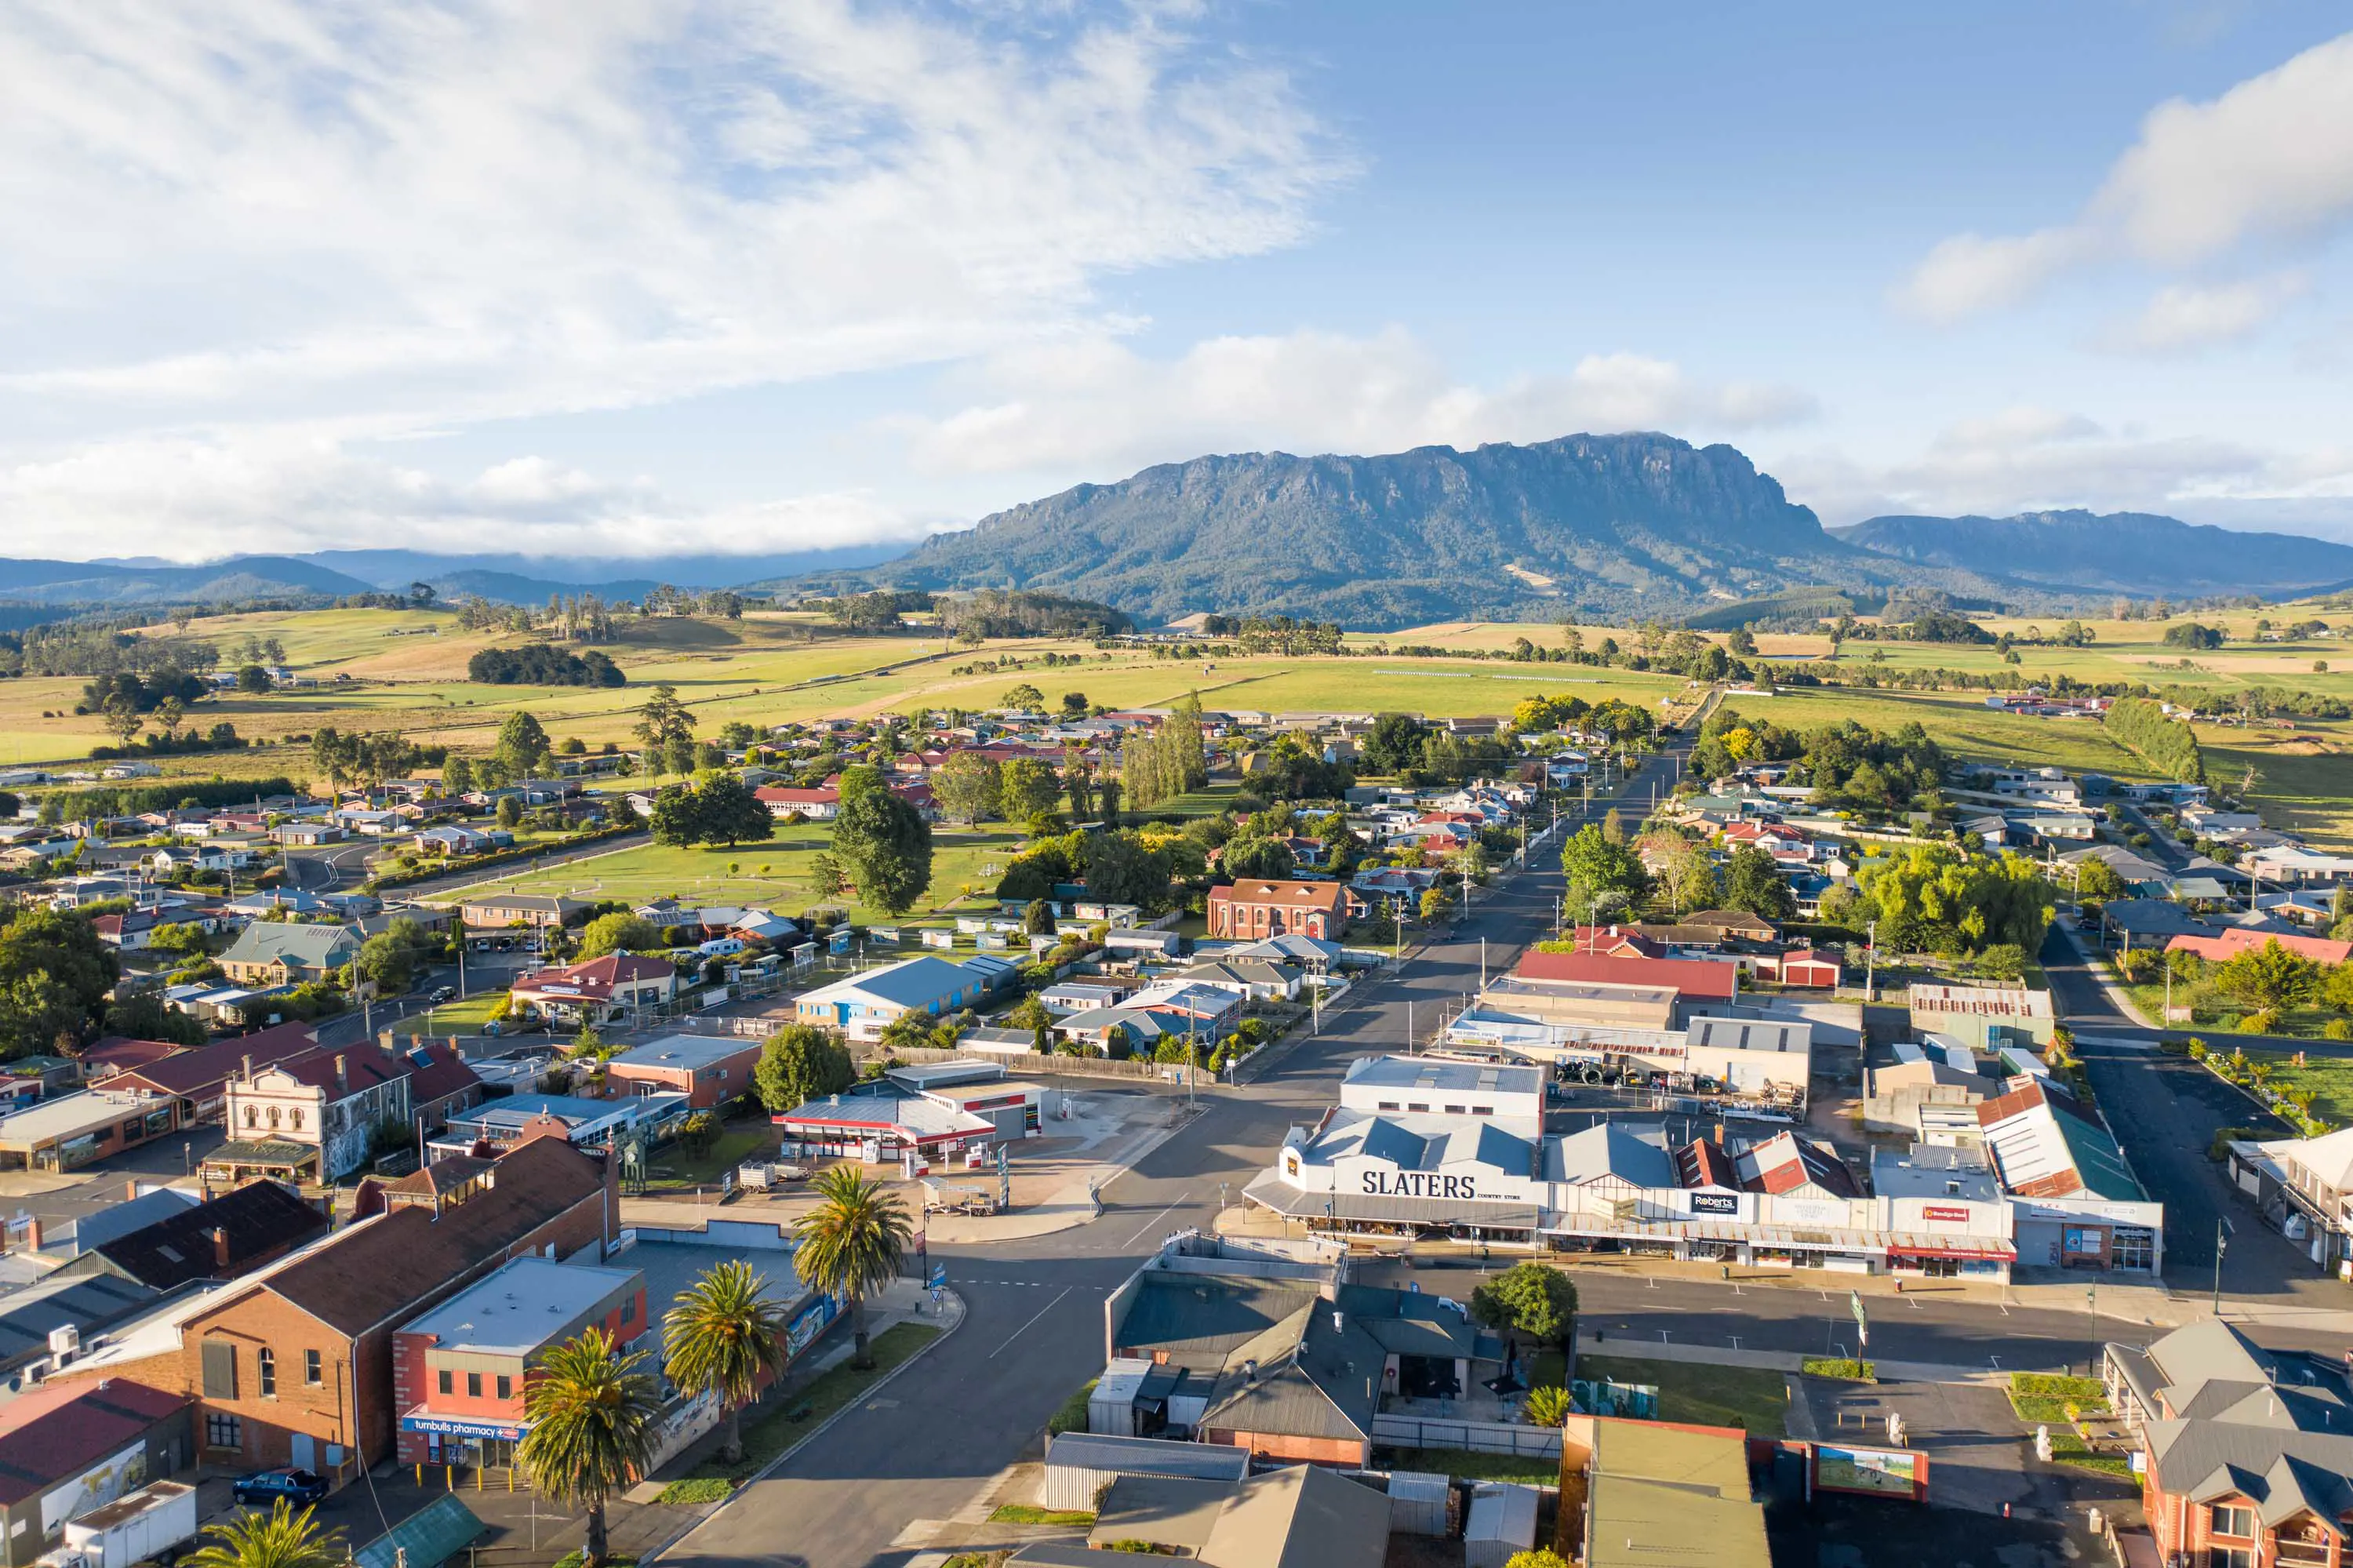 An elevated view of a small, country town with wide streets set in the shadow of a large range of mountains.